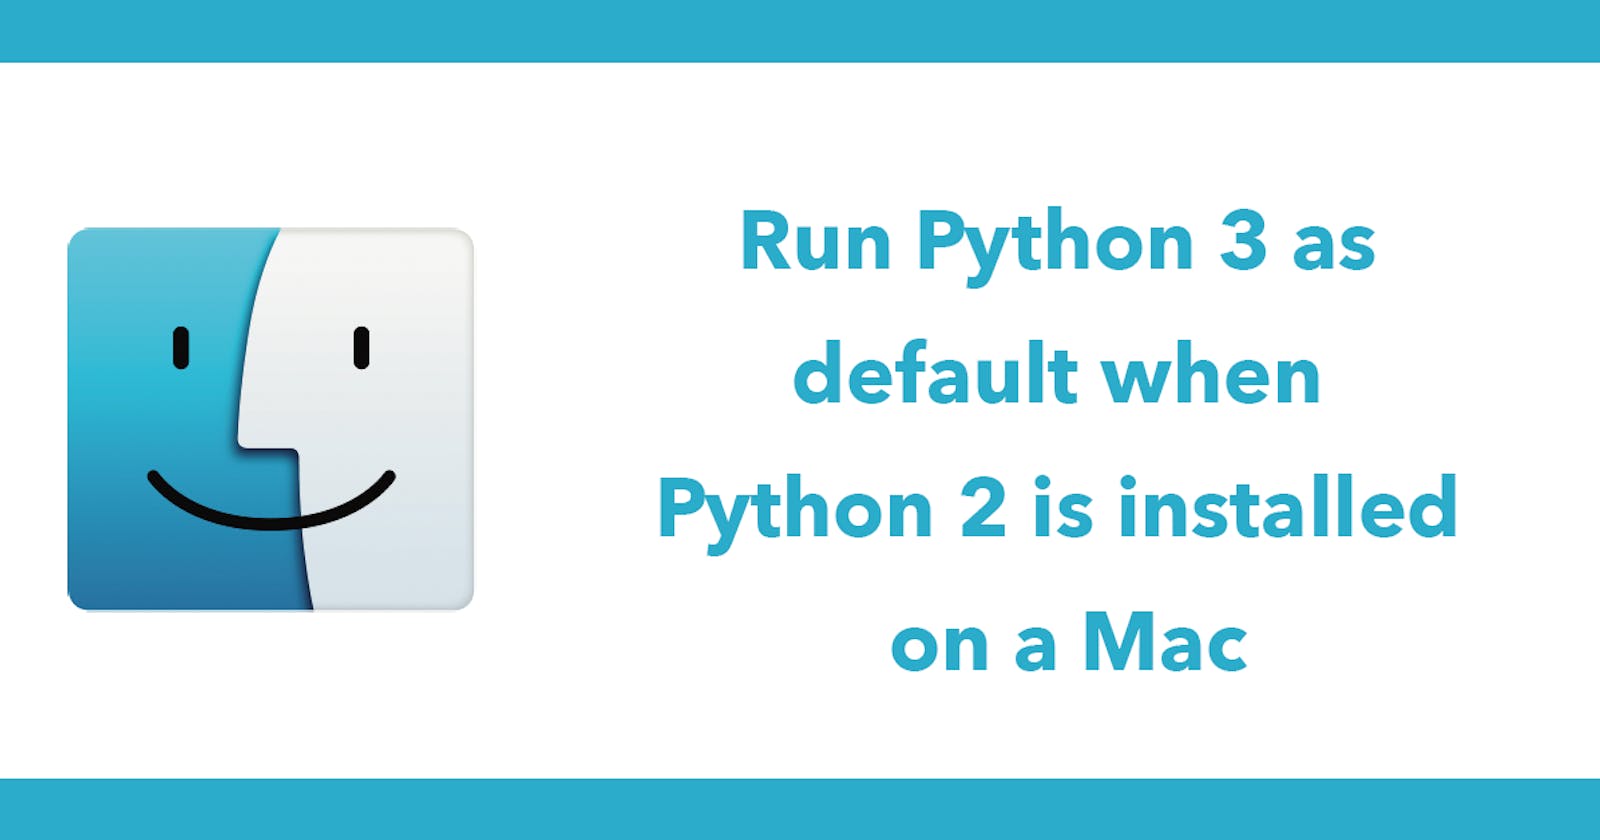 Run Python 3 as default when Python 2 is installed on a Mac